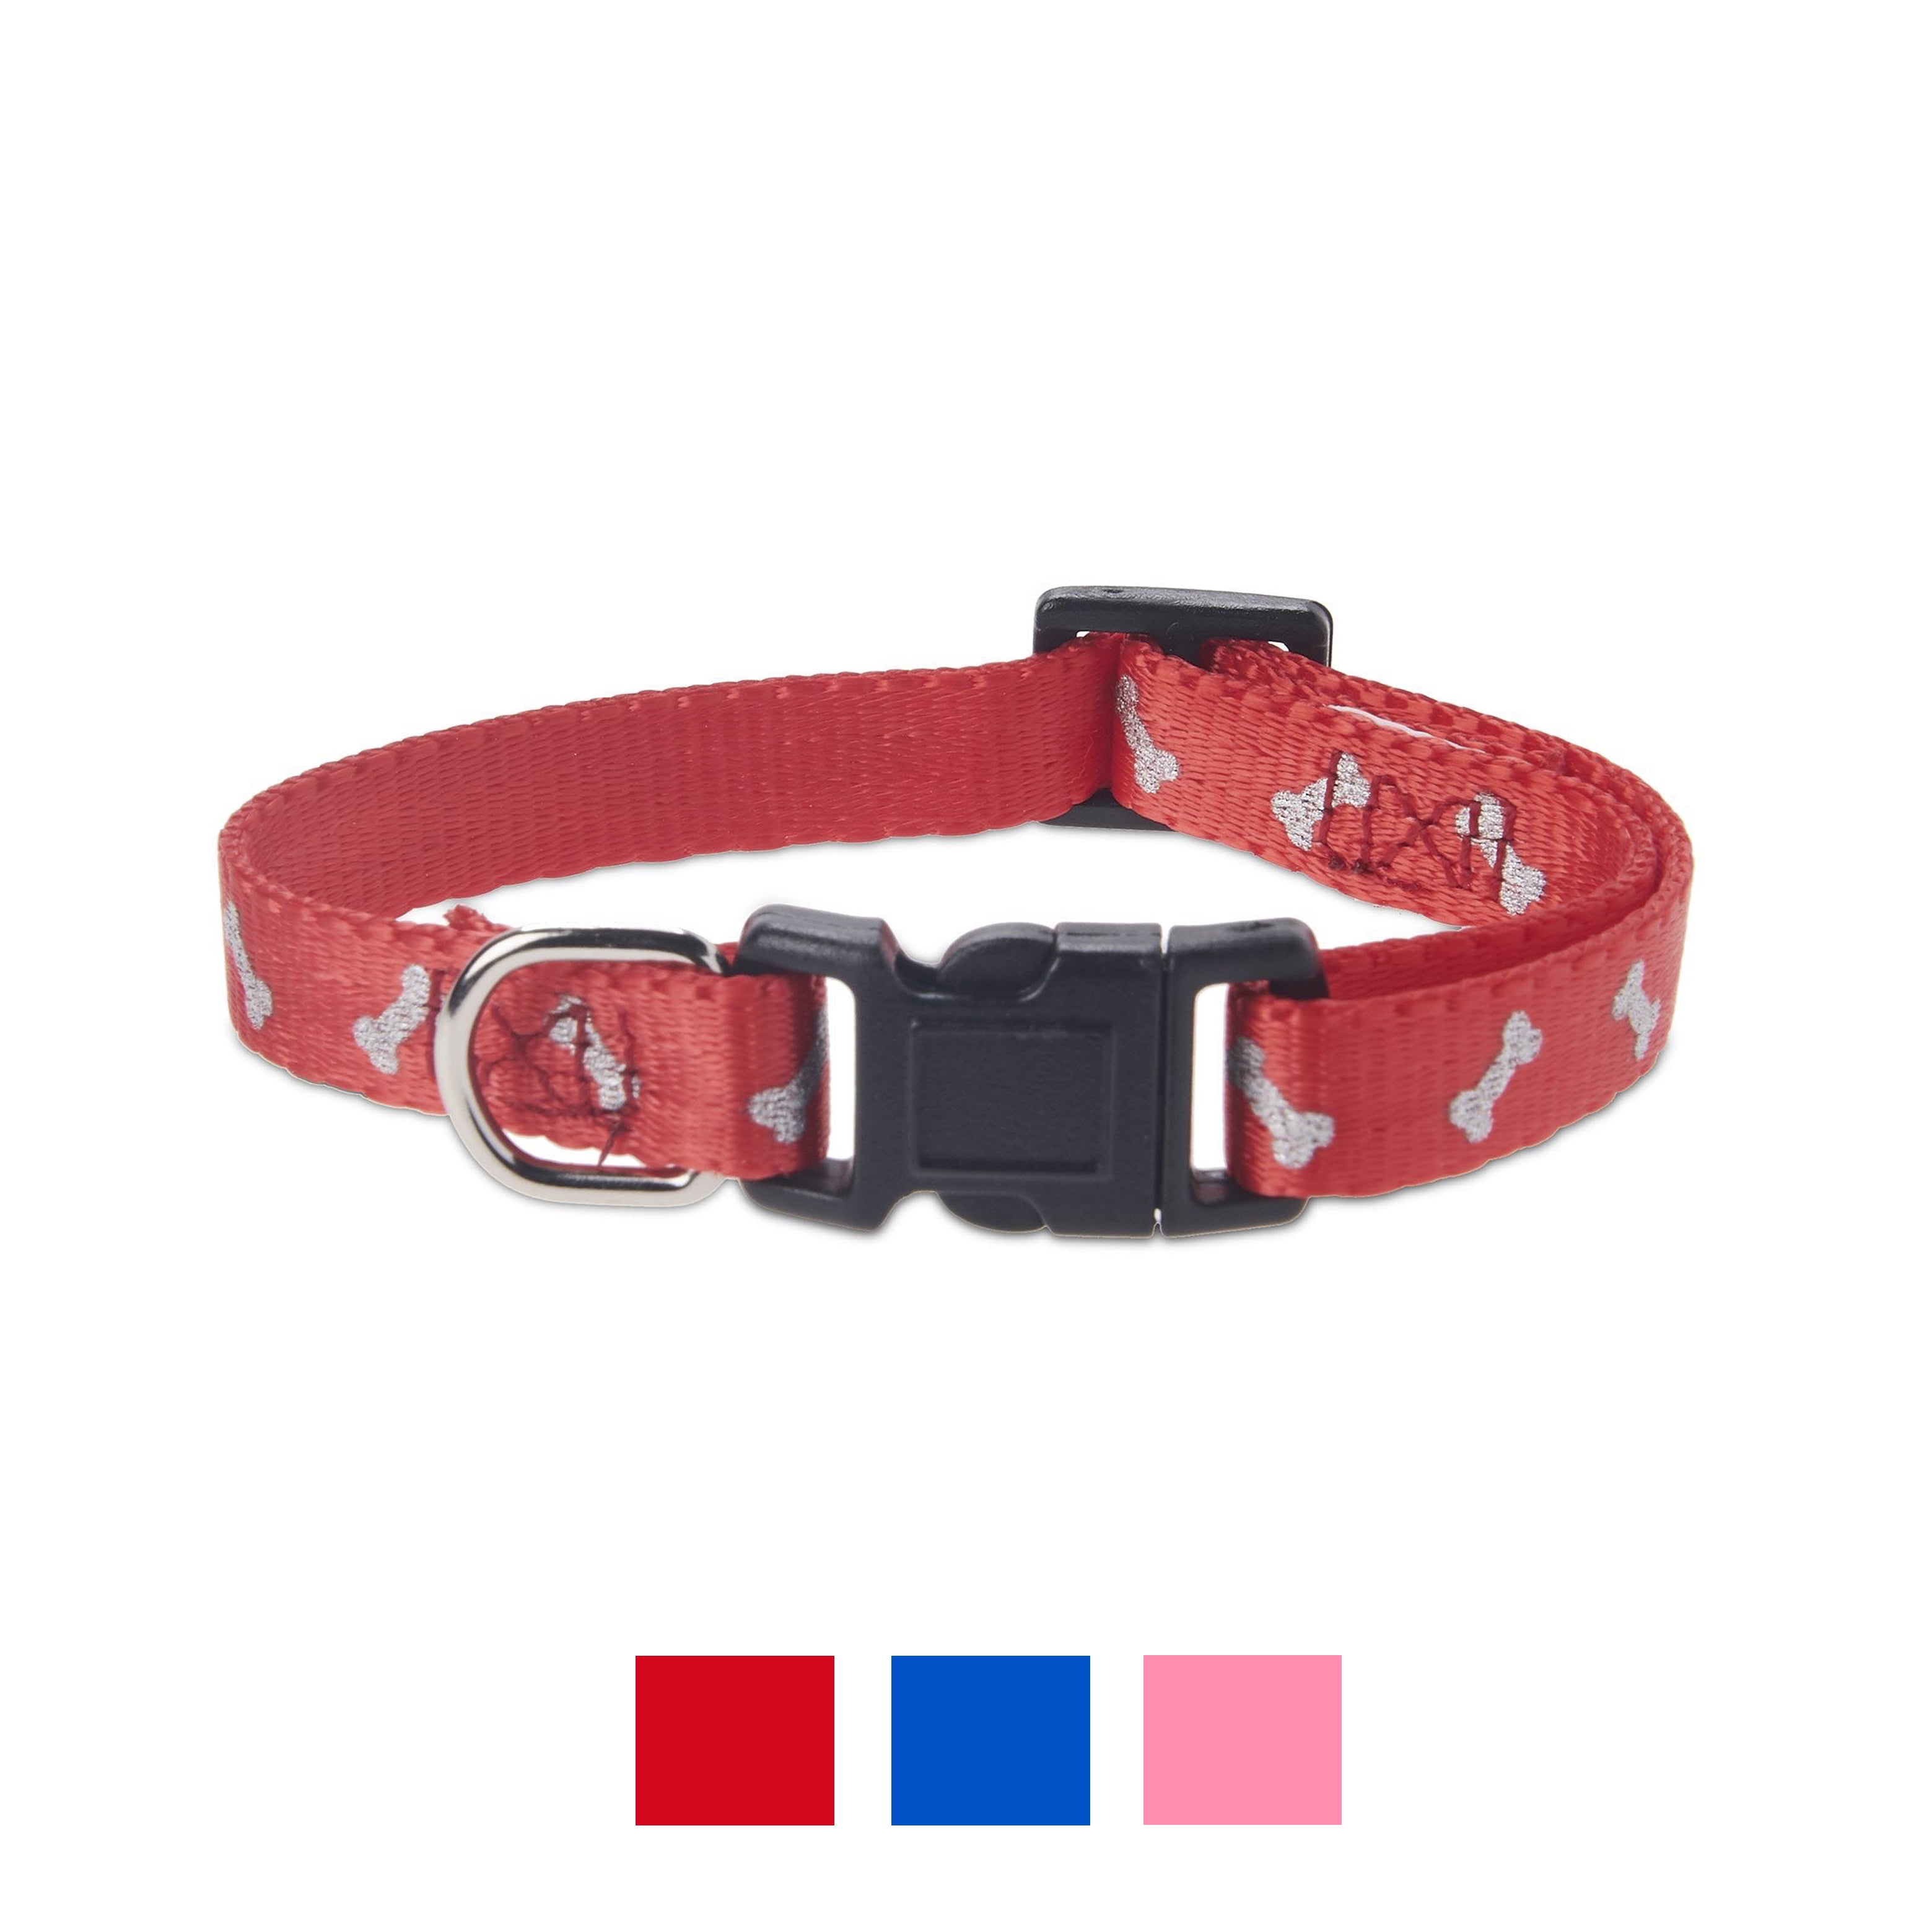 Pet Leash Dogs Nylon Collars Puppy Reflective Waterproof Breathable Padded US 